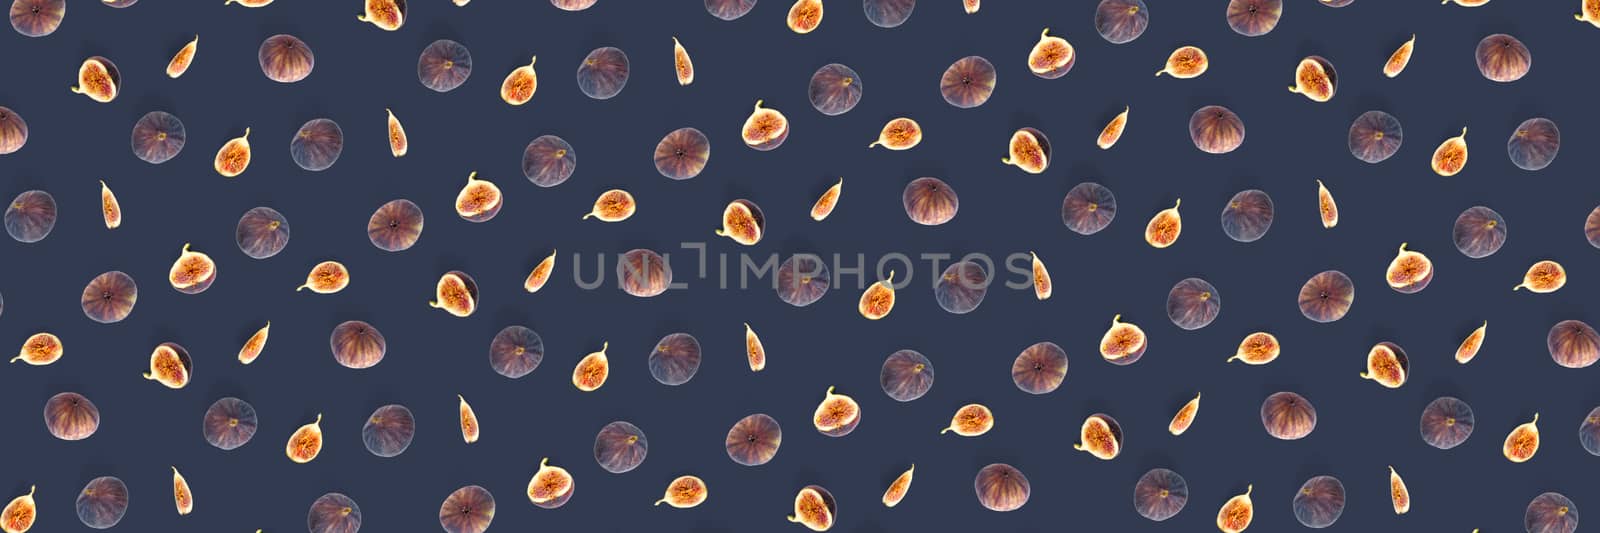 Background from Fresh figs. Food Photo. Modern fig fruits background. Creative set of the whole and sliced figs on a purpule background, not pattern